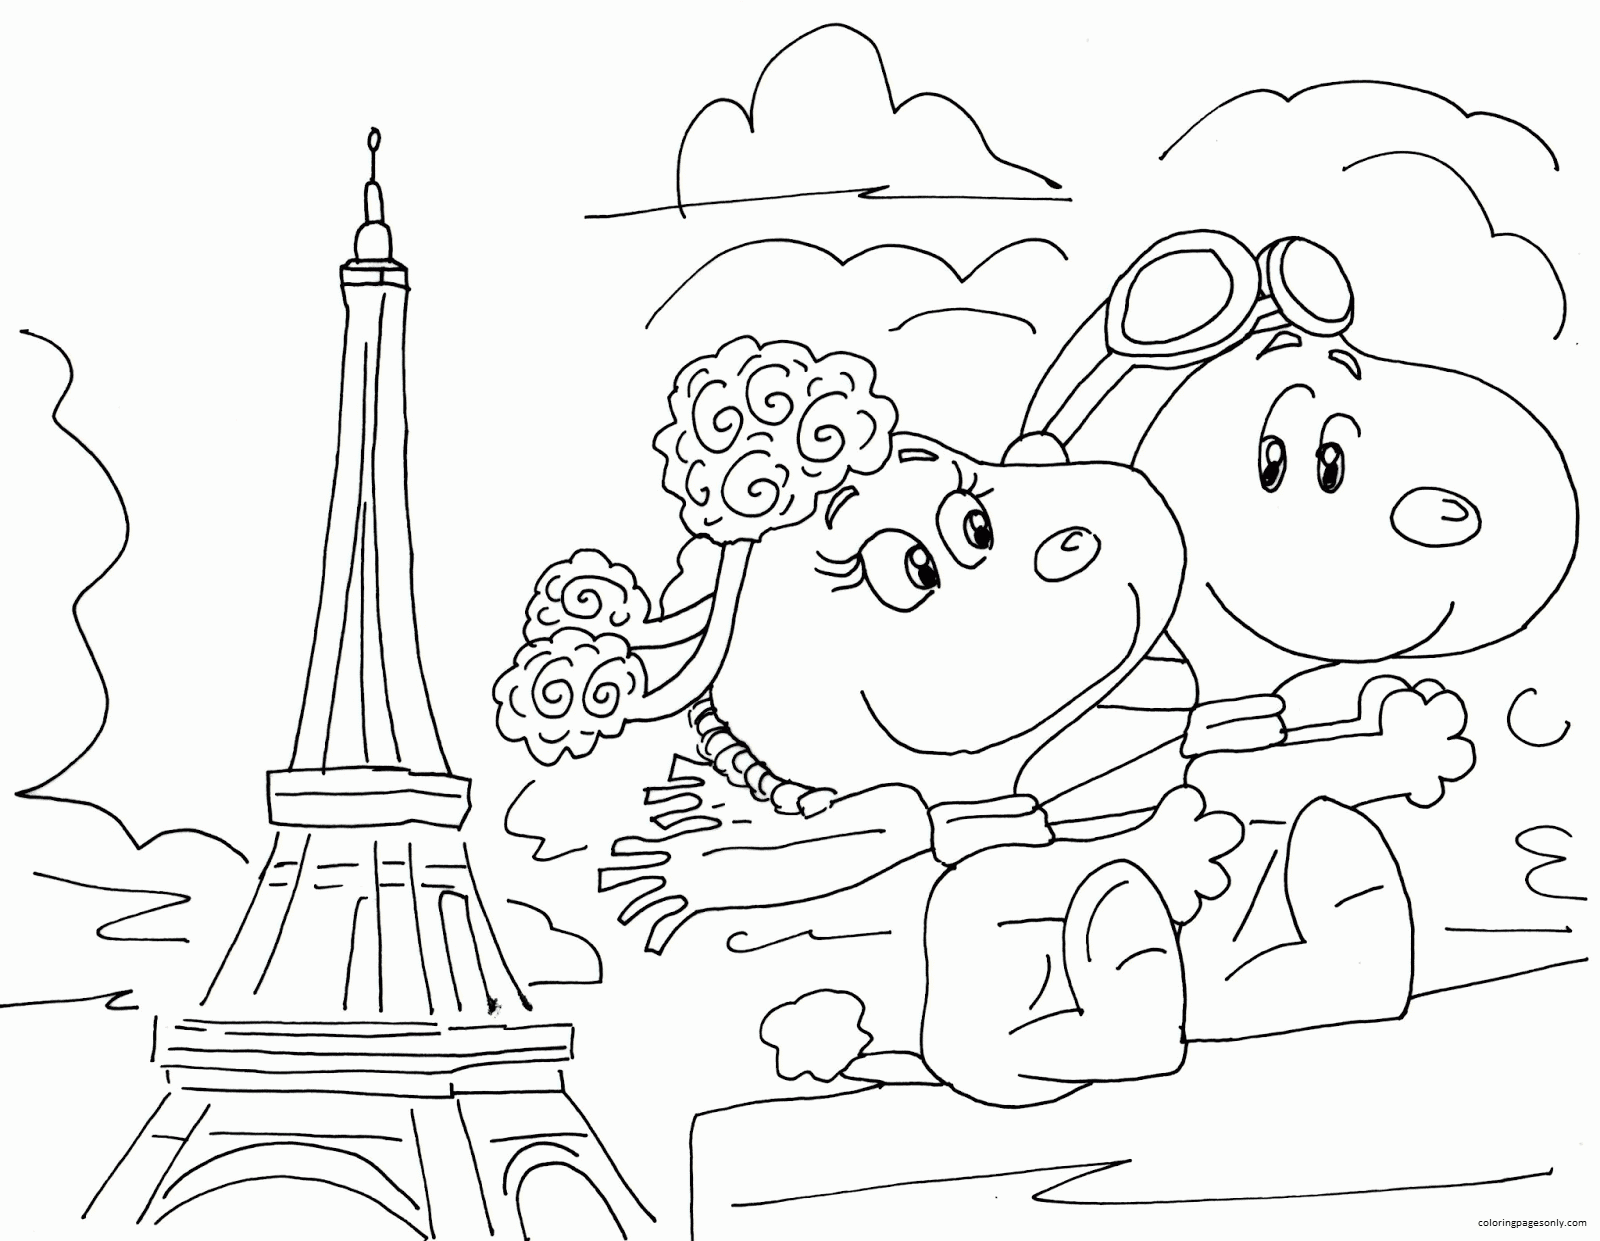 Snoopy Image 1 Coloring Pages